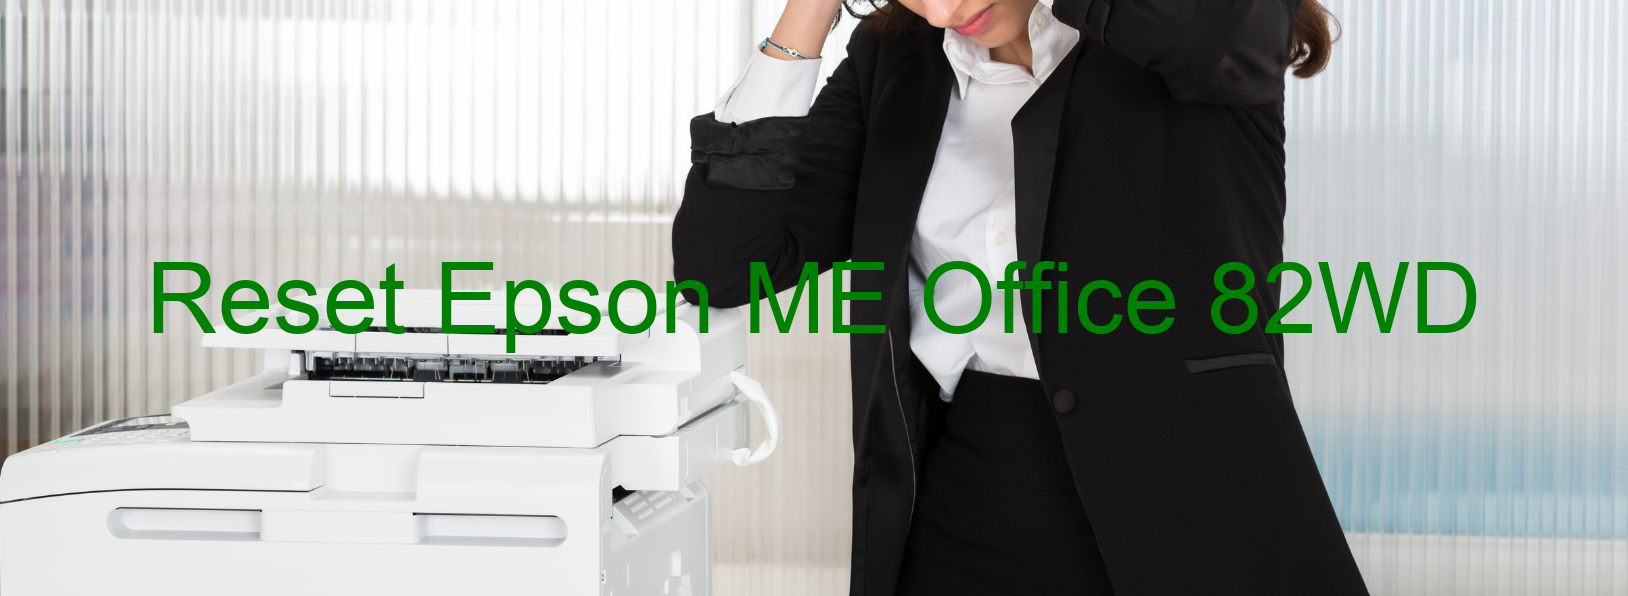 reset Epson ME Office 82WD